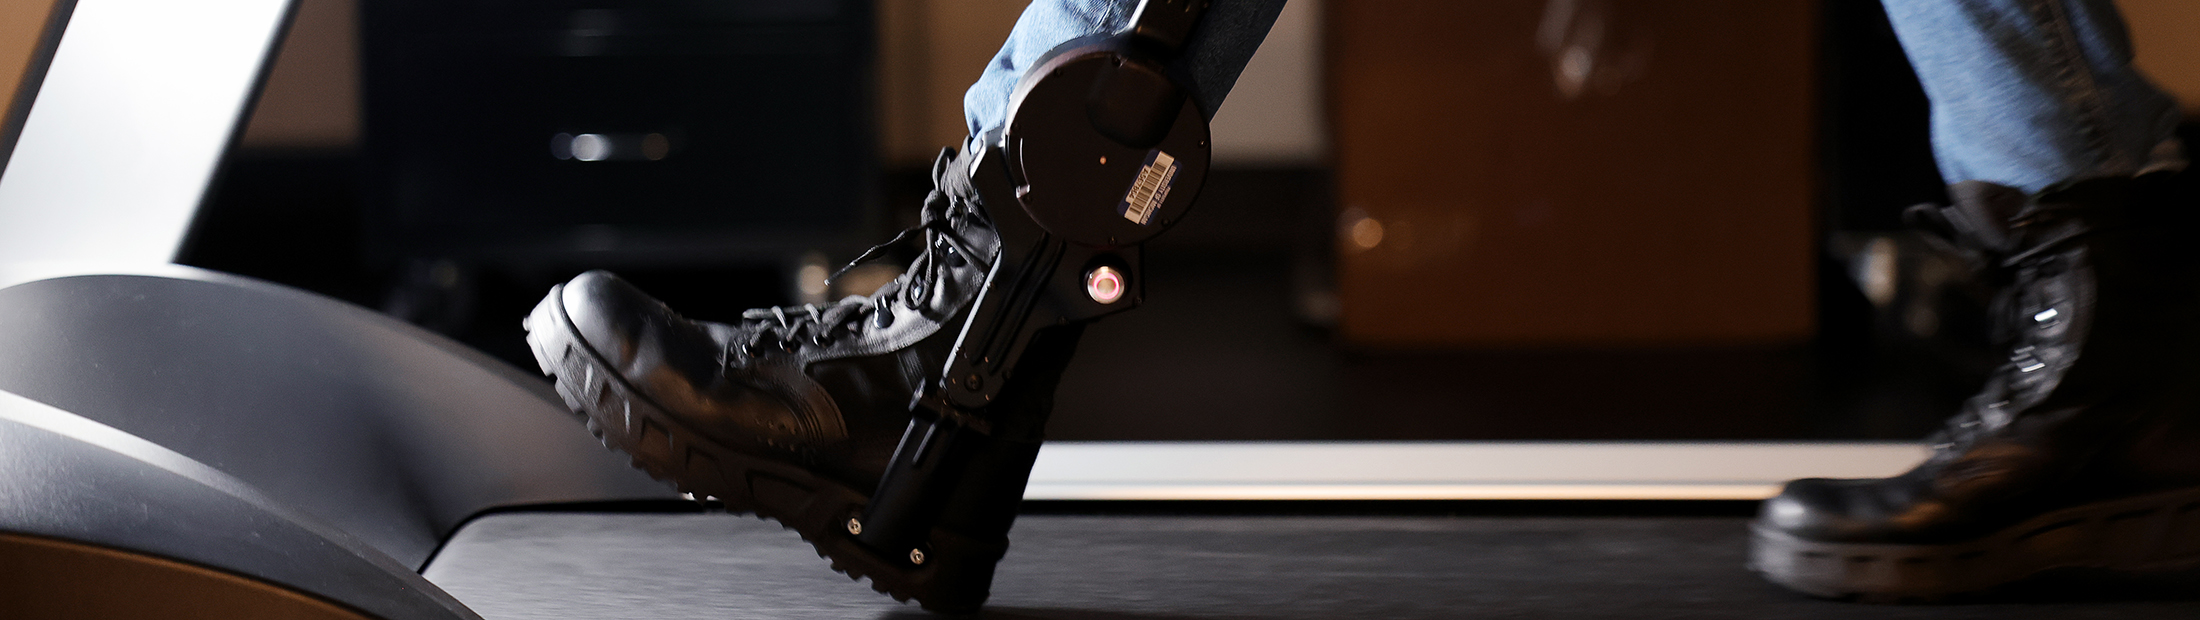 An ankle exoskeleton strapped to a human walking on a treadmill